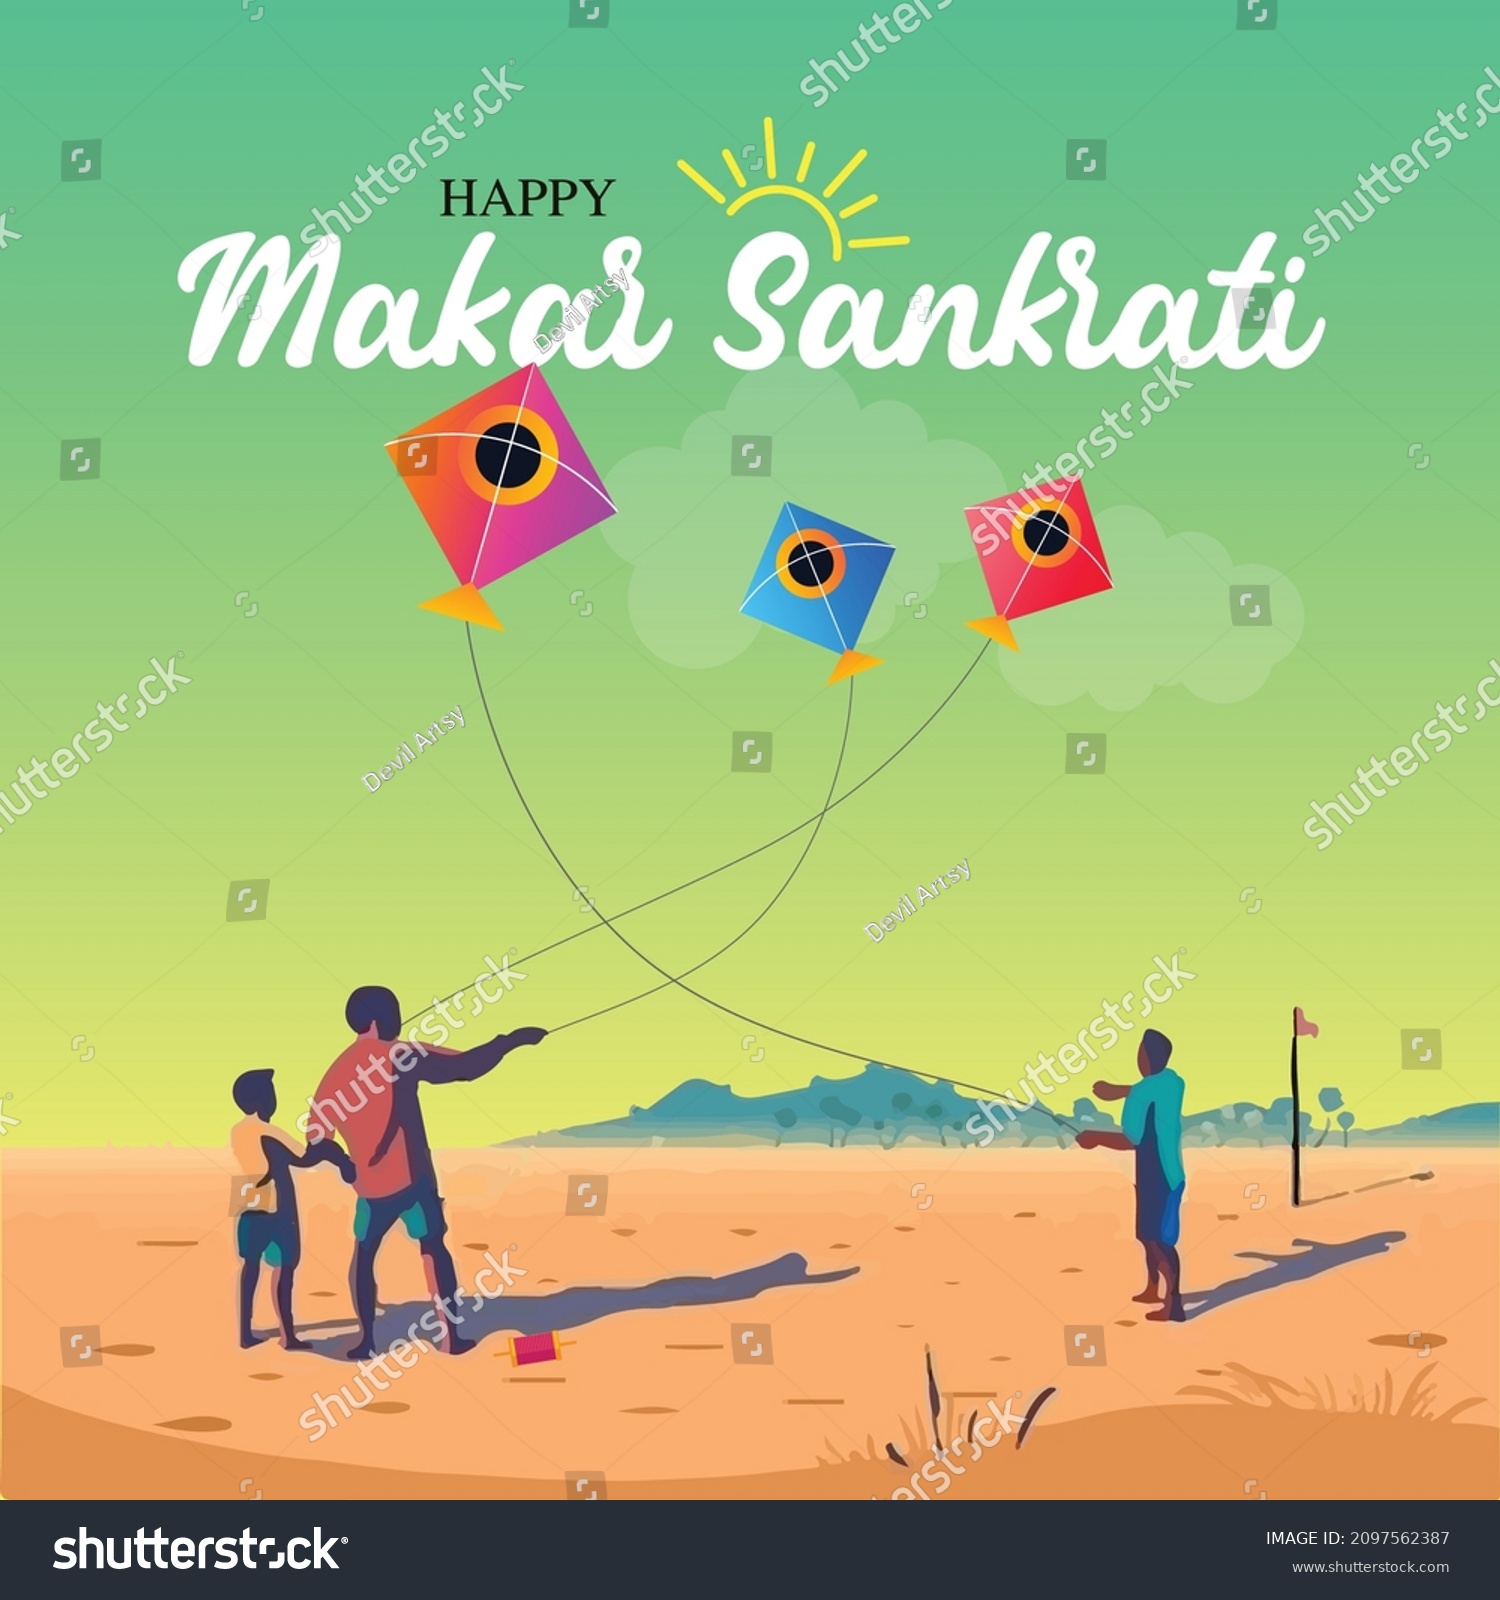 SVG of illustration of Happy Makar Sankranti with colorful kite string for festival of India. svg